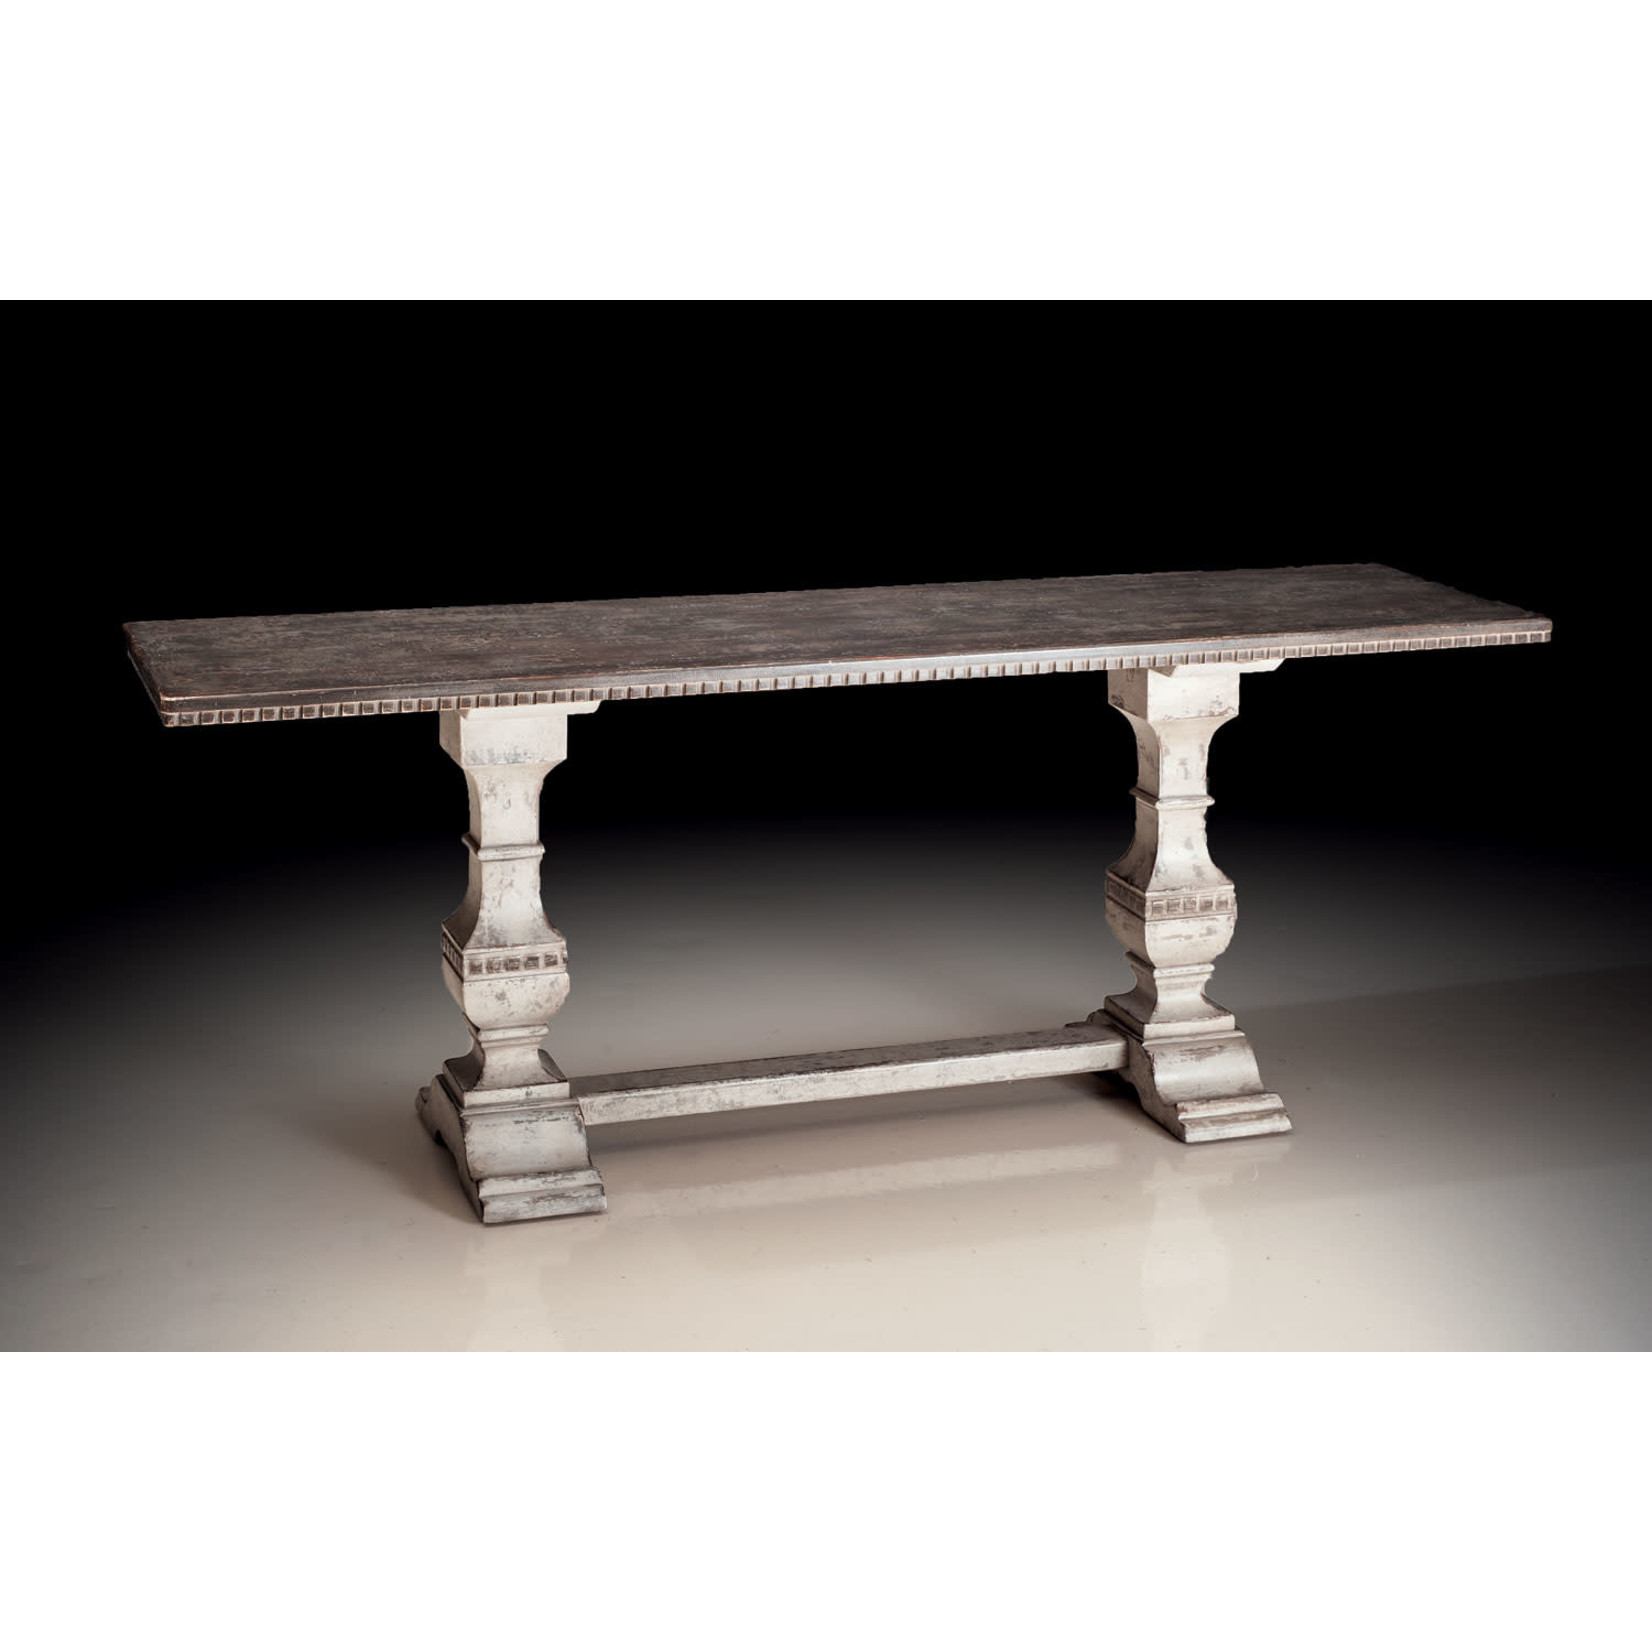 David Michael Painted Tuscan Gray/Antique White with Dentil Millwork Console Table